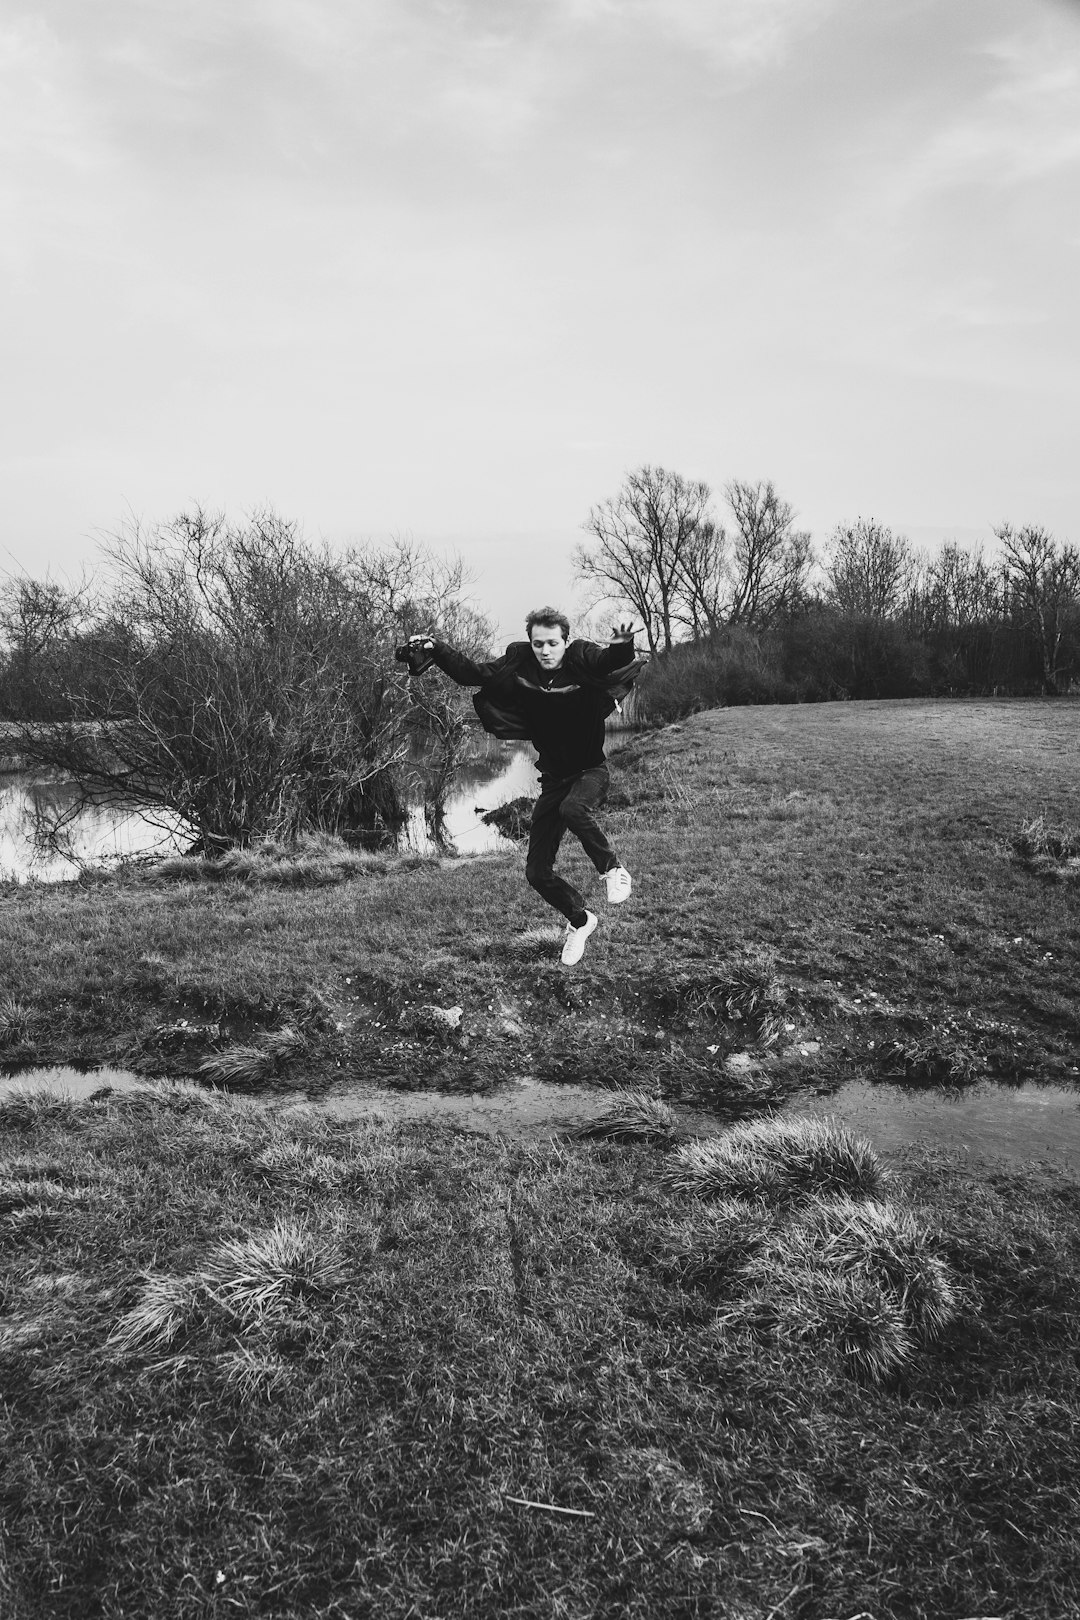 grayscale photo of man in black jacket and pants jumping on grass field